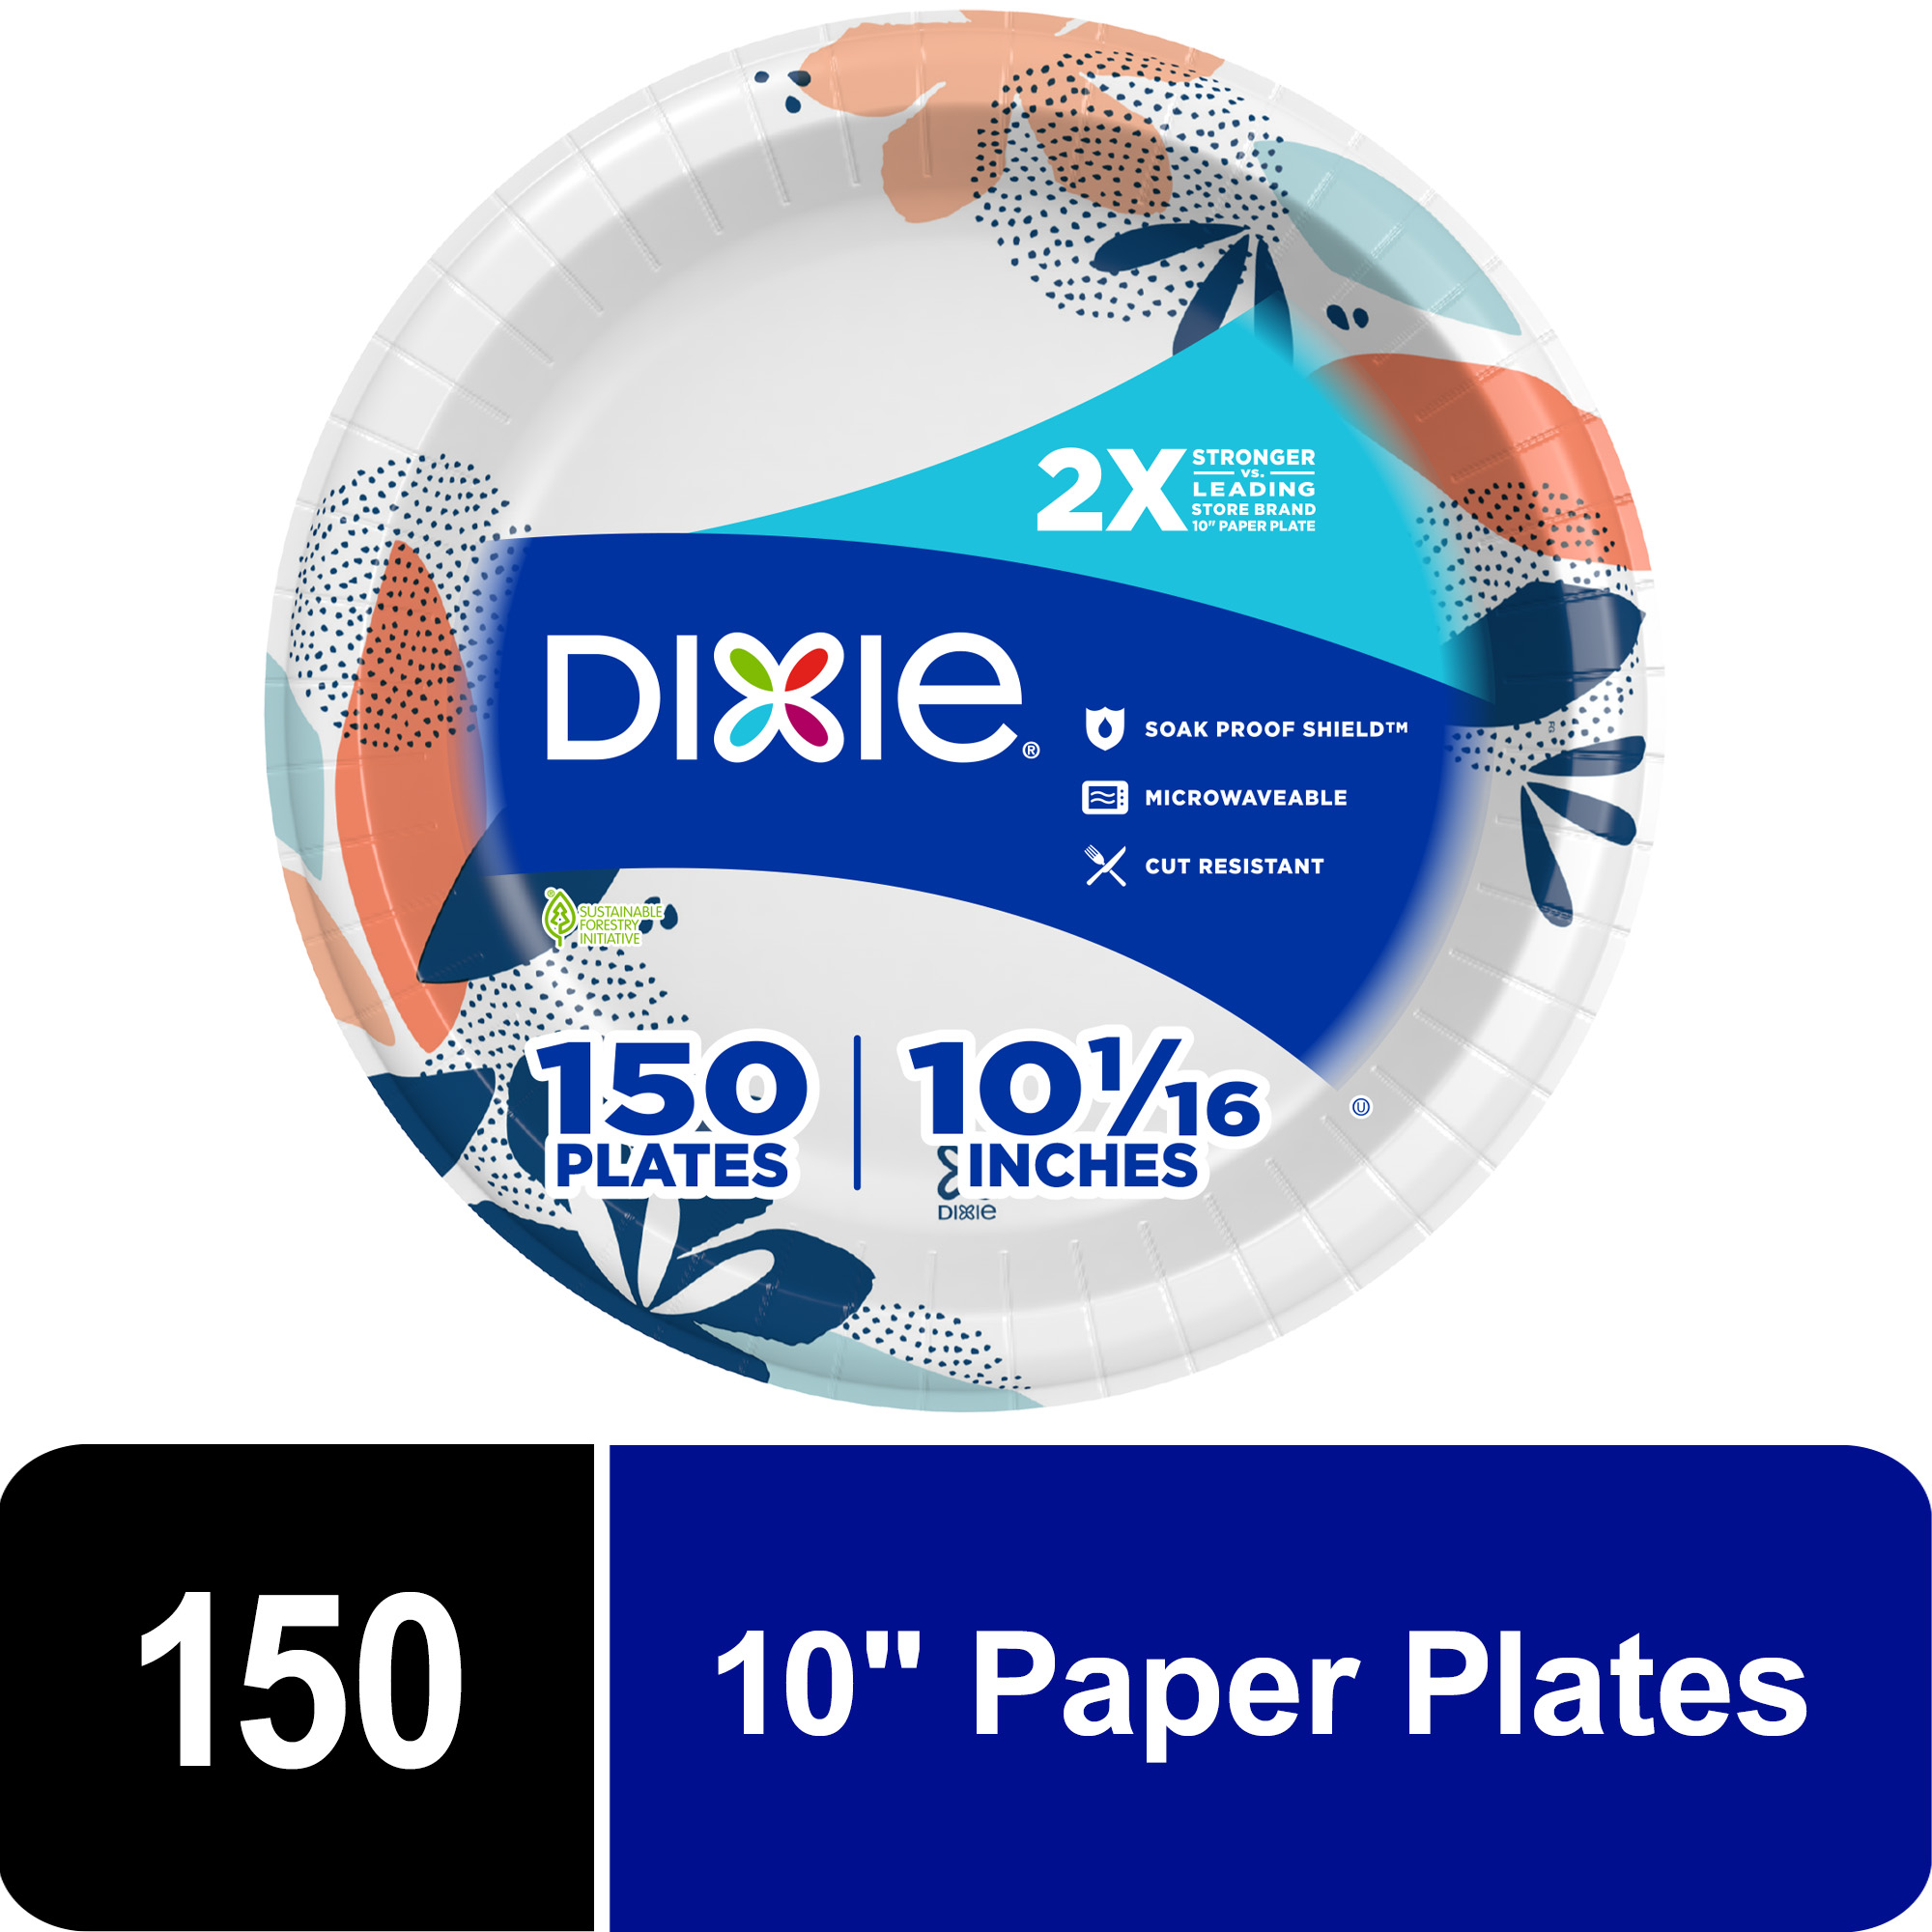 Dixie Paper Plates,10 Inch, 150 Count, 2X Stronger*, Multicolor, Disposable Plates - image 1 of 15